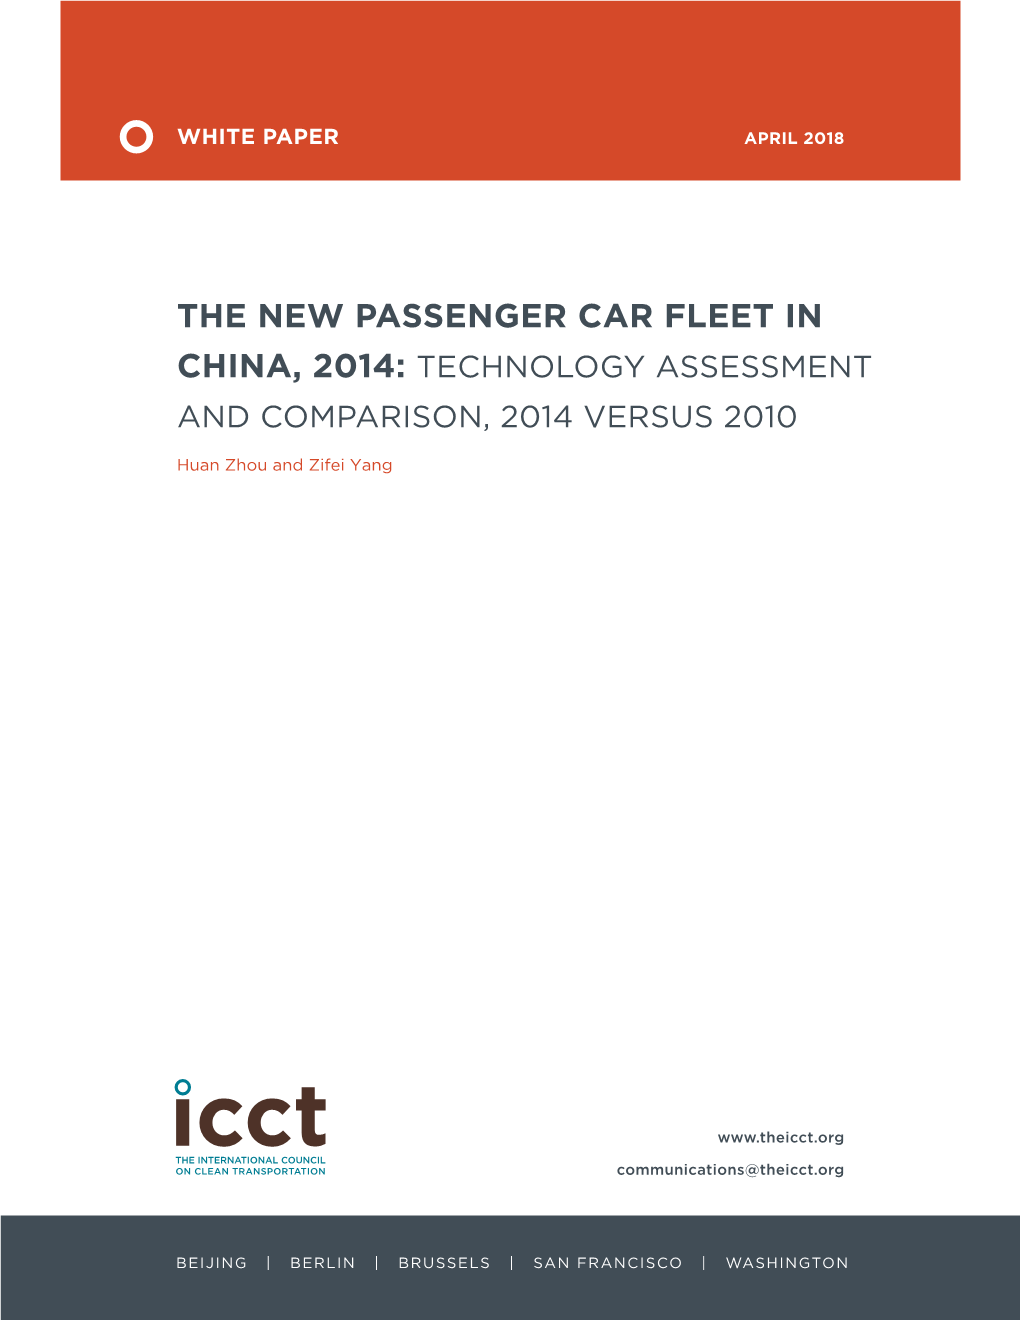 The New Passenger Car Fleet in China, 2014: Technology Assessment and Comparison, 2014 Versus 2010